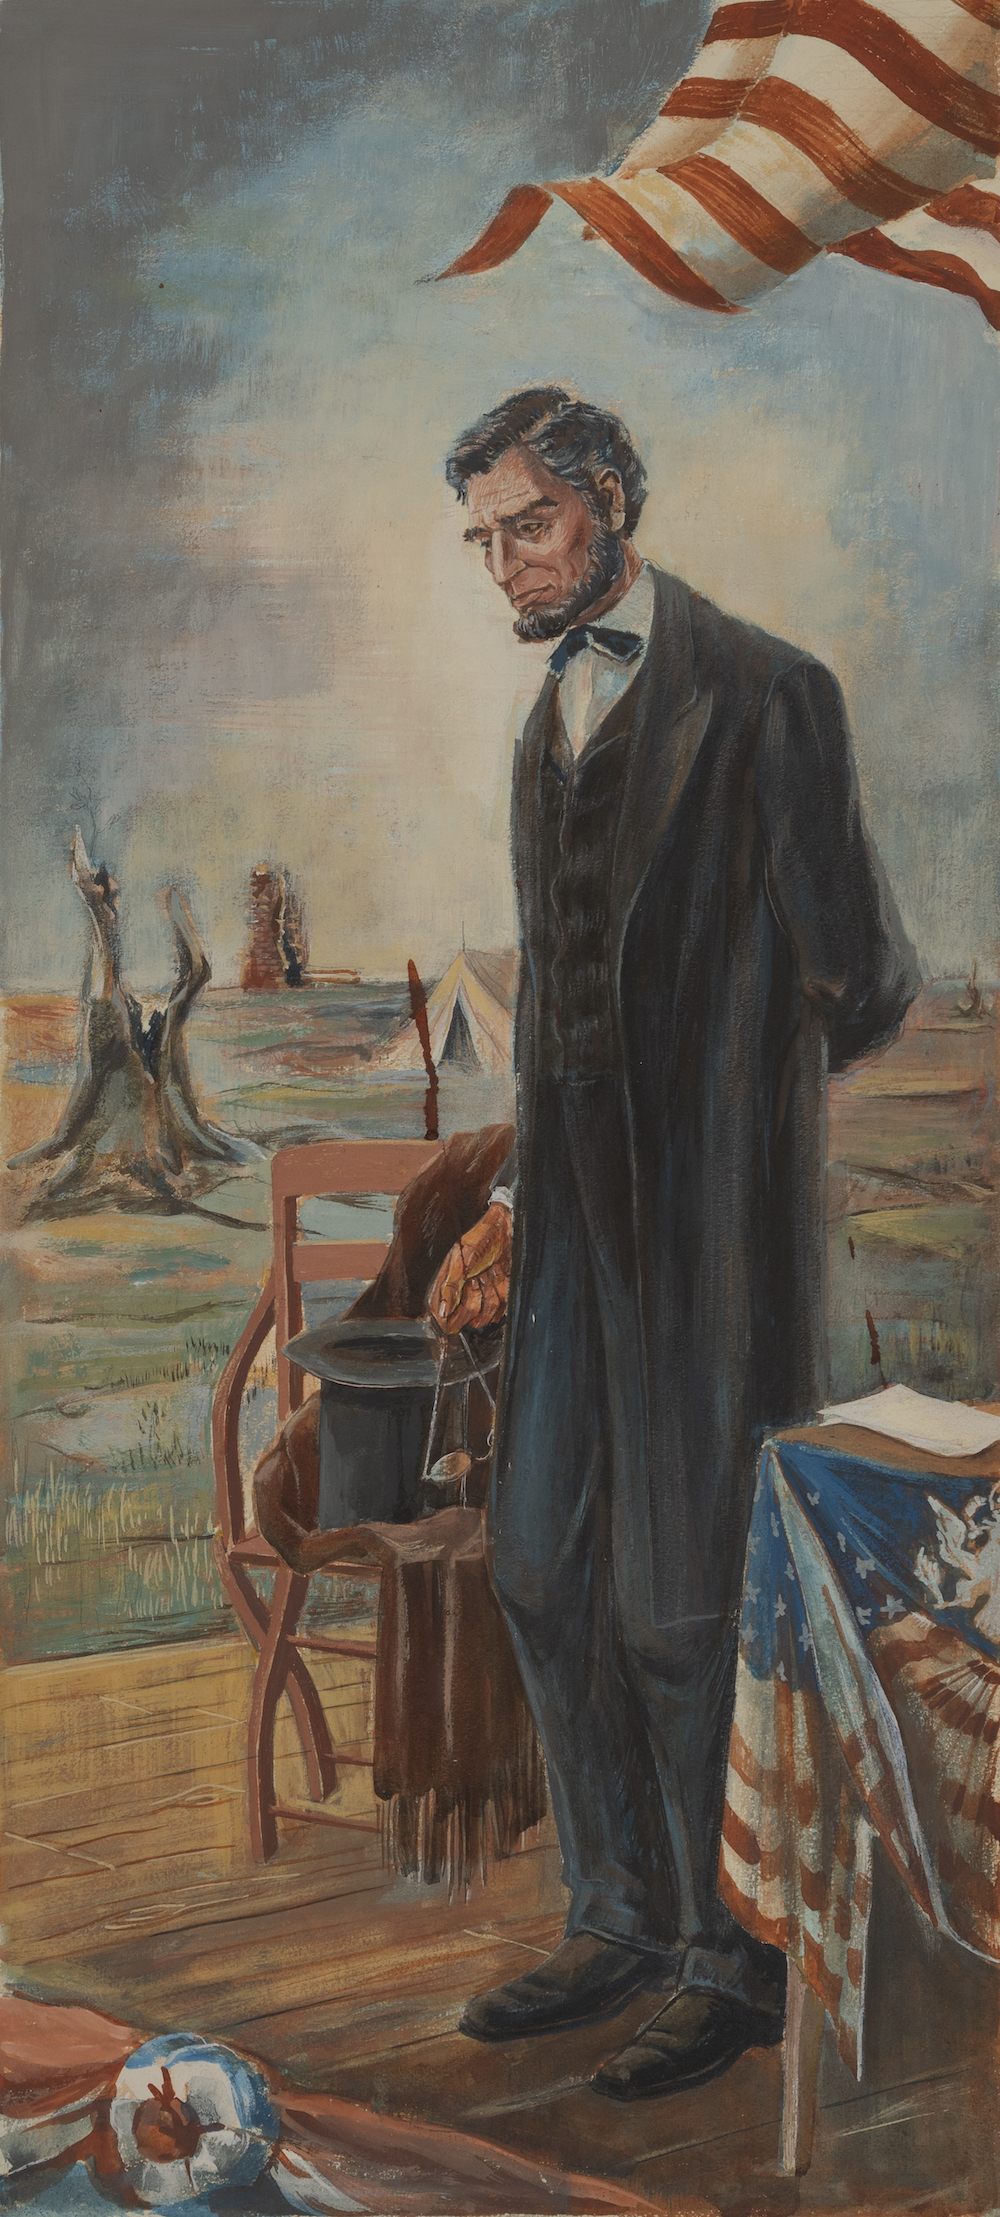 A tall, narrow portrait of Abraham Lincoln standing on a stage in front of a field with a tent and a burning tree stump. There is a portion of an American flag visible over his head, waving in the breeze.